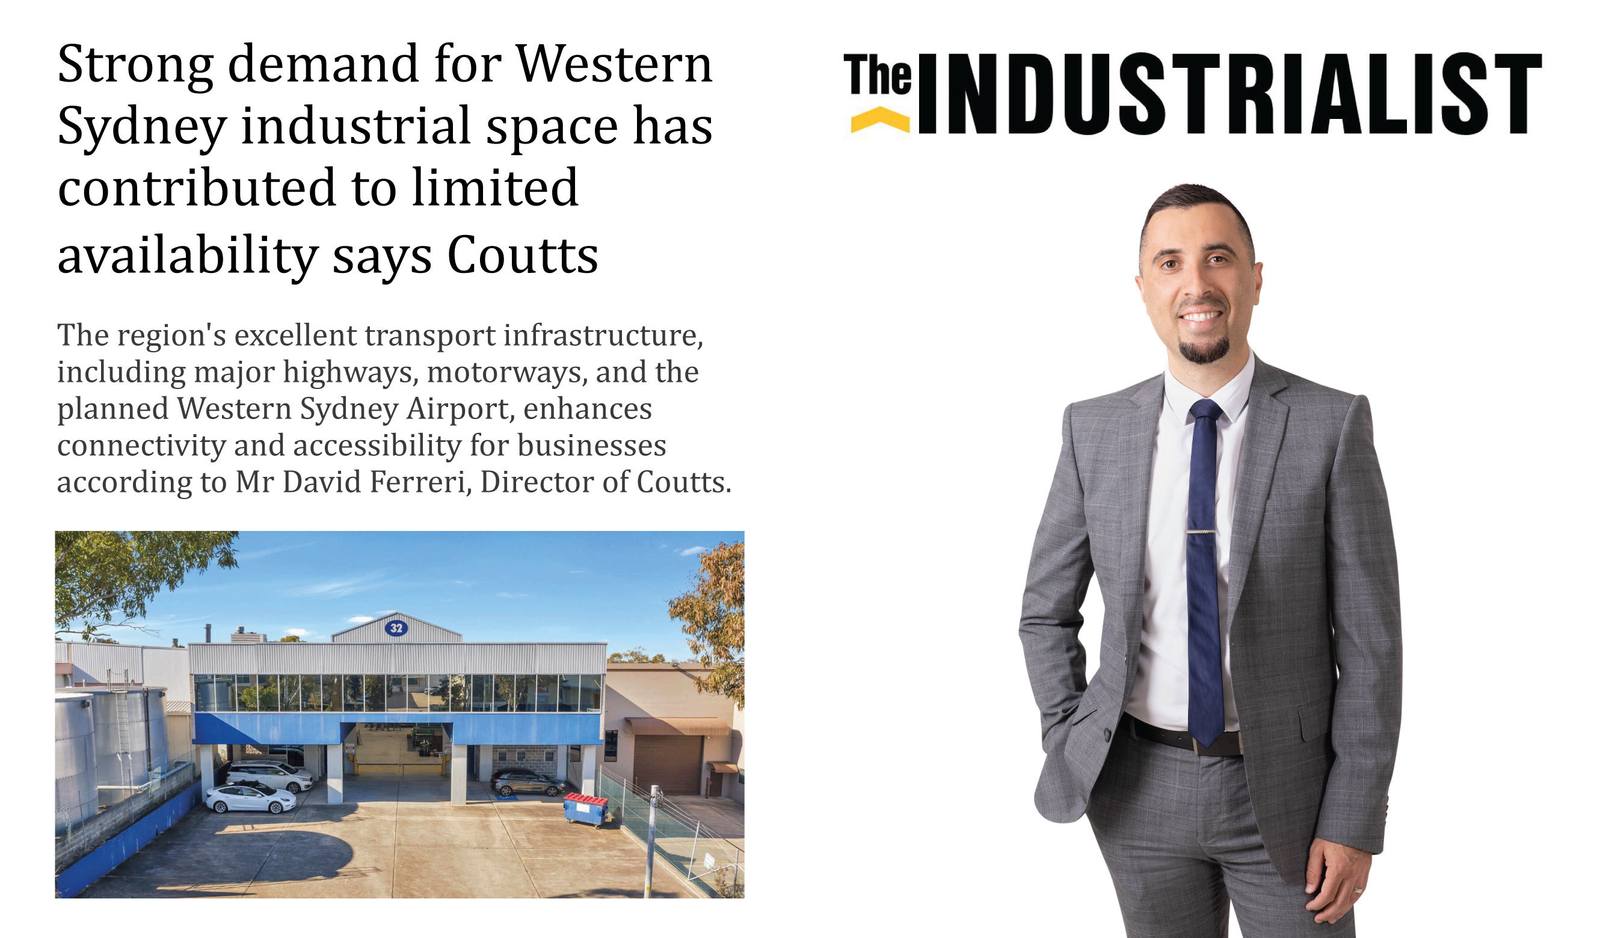 Strong demand for Western Sydney industrial space has contributed to limited availability says Coutts